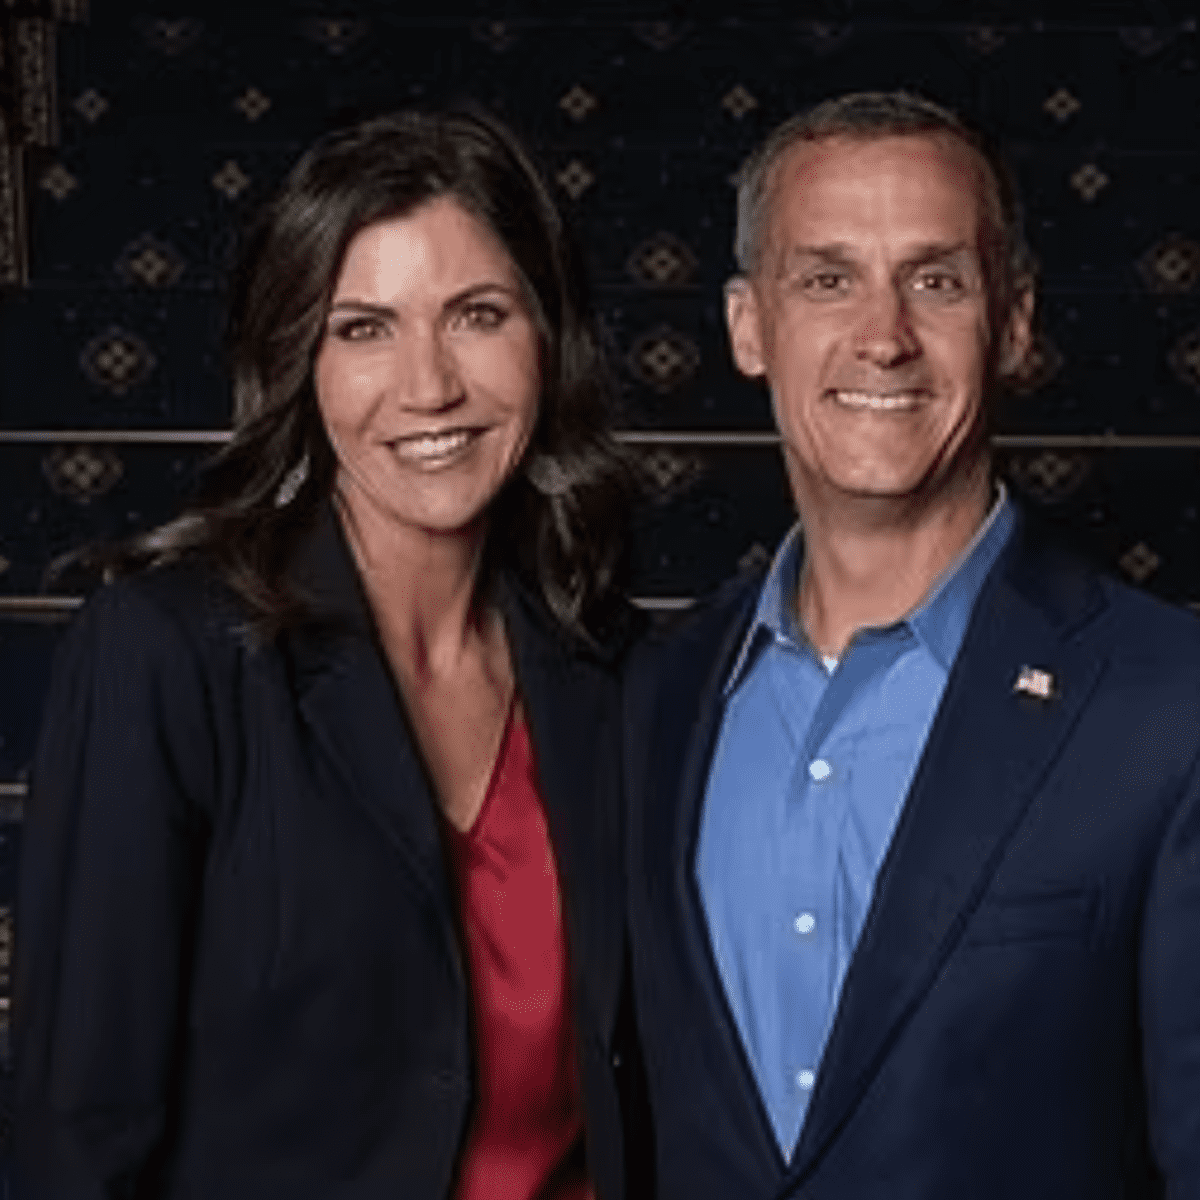 SD Governor Kristi Noem & Corey Lewendowski Not Qualified For Security Clearances